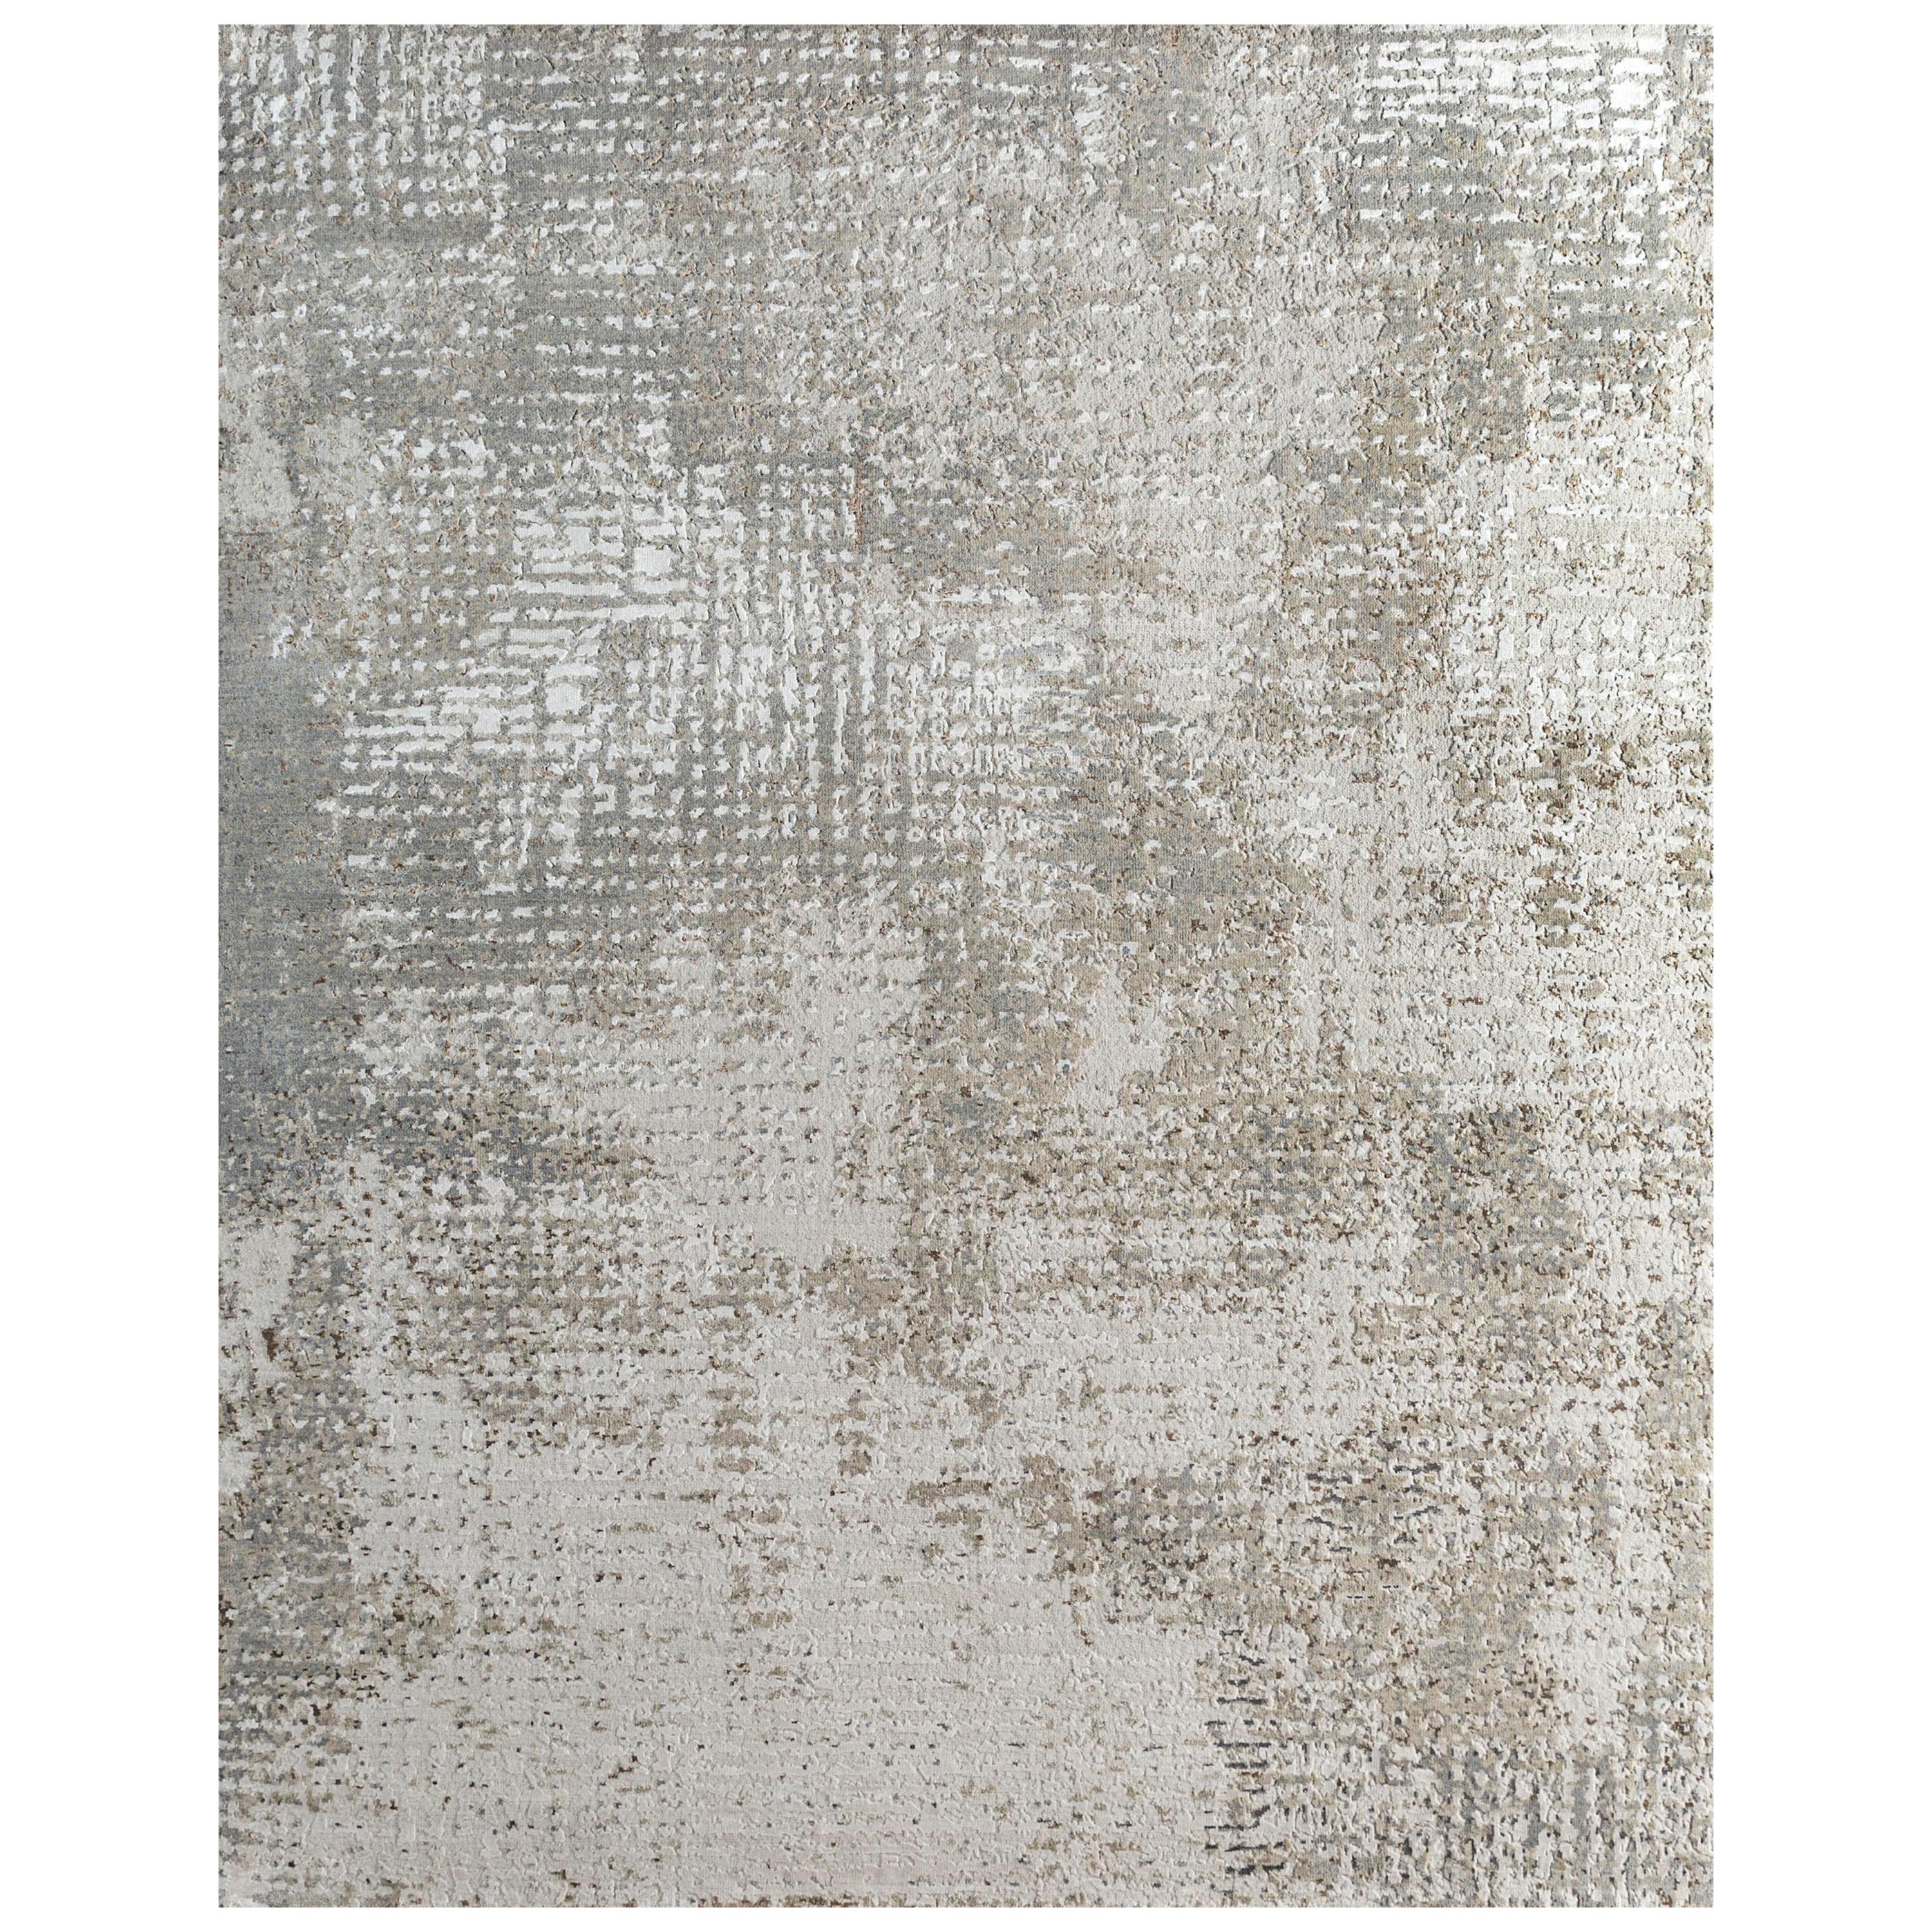  Ashwood Rug by Rural Weavers, Knotted, Wool, Bamboo Silk, 240x300cm